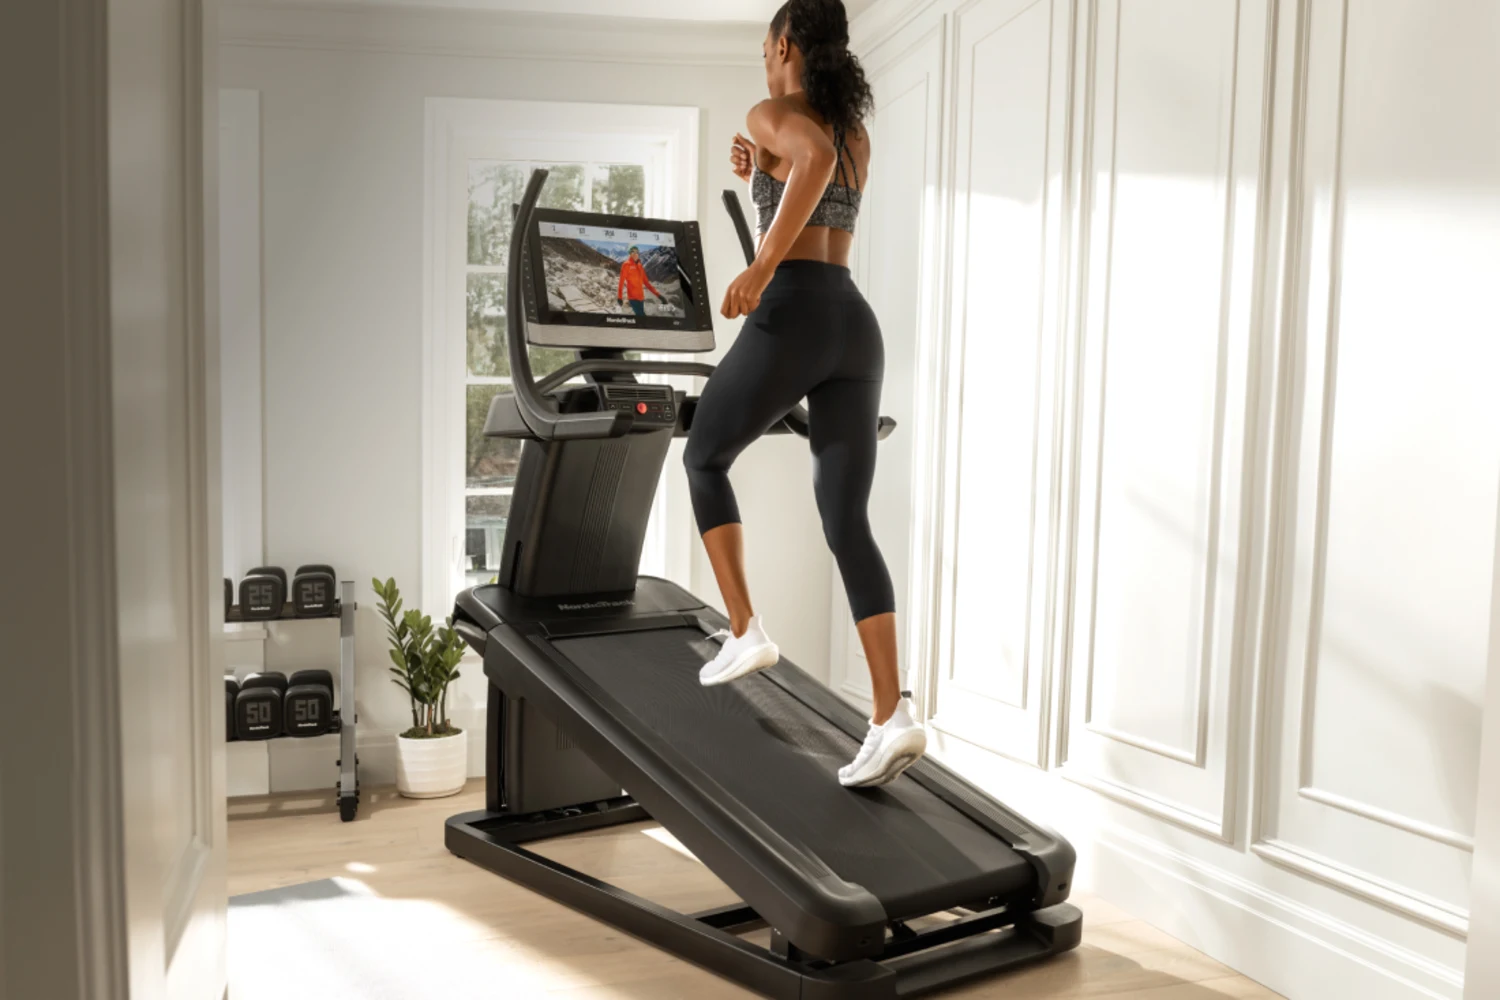 Why do people love to use treadmills?